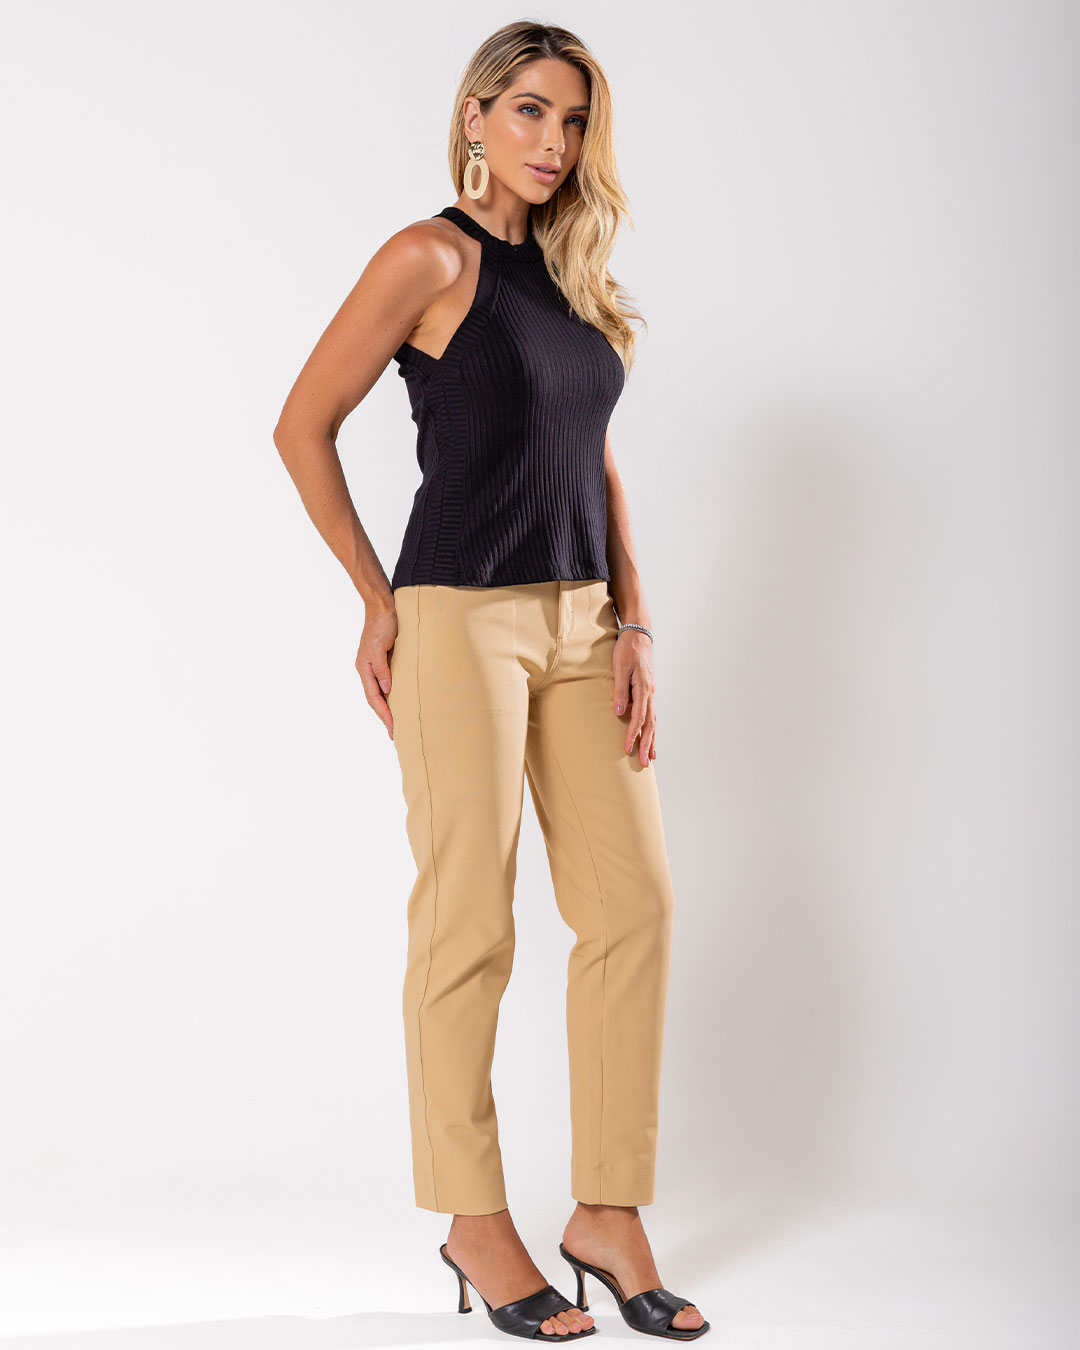 Miss Misses - Pants Miss Misses Tailoring With Pockets Beige - 54068215